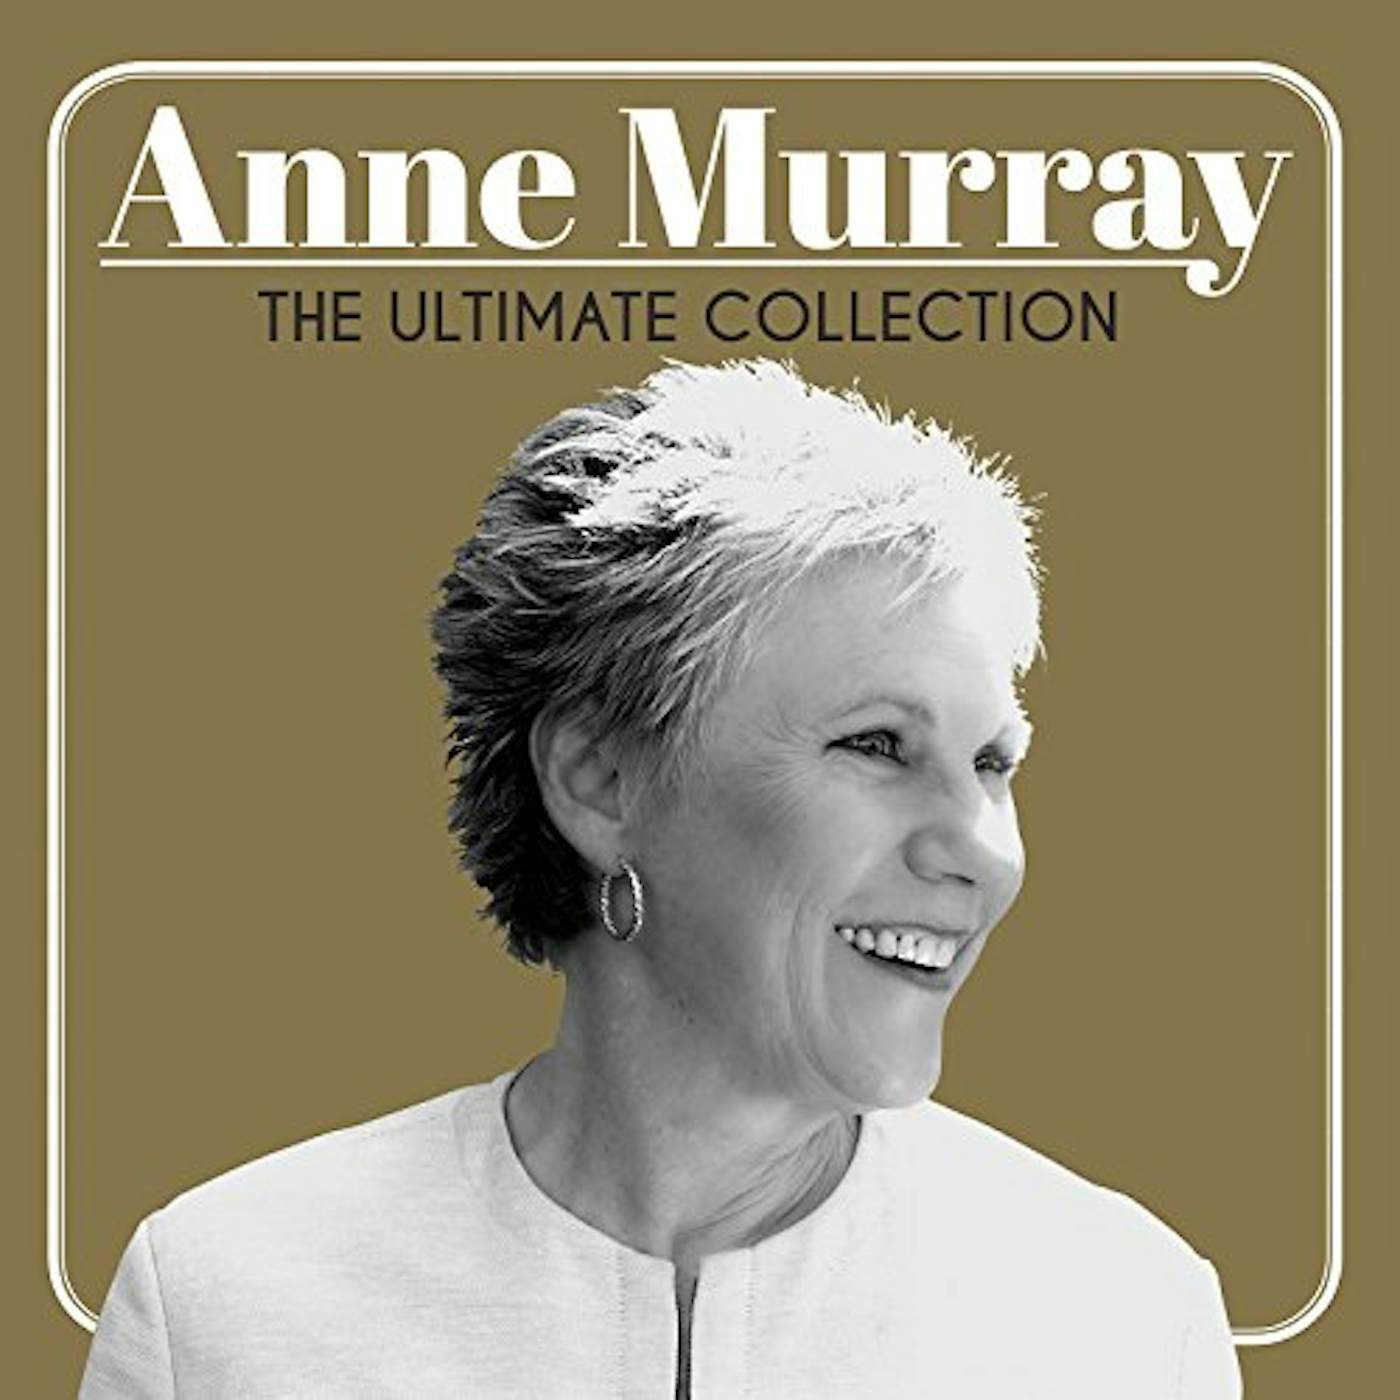 Anne Murray ULTIMATE COLLECTION Vinyl Record